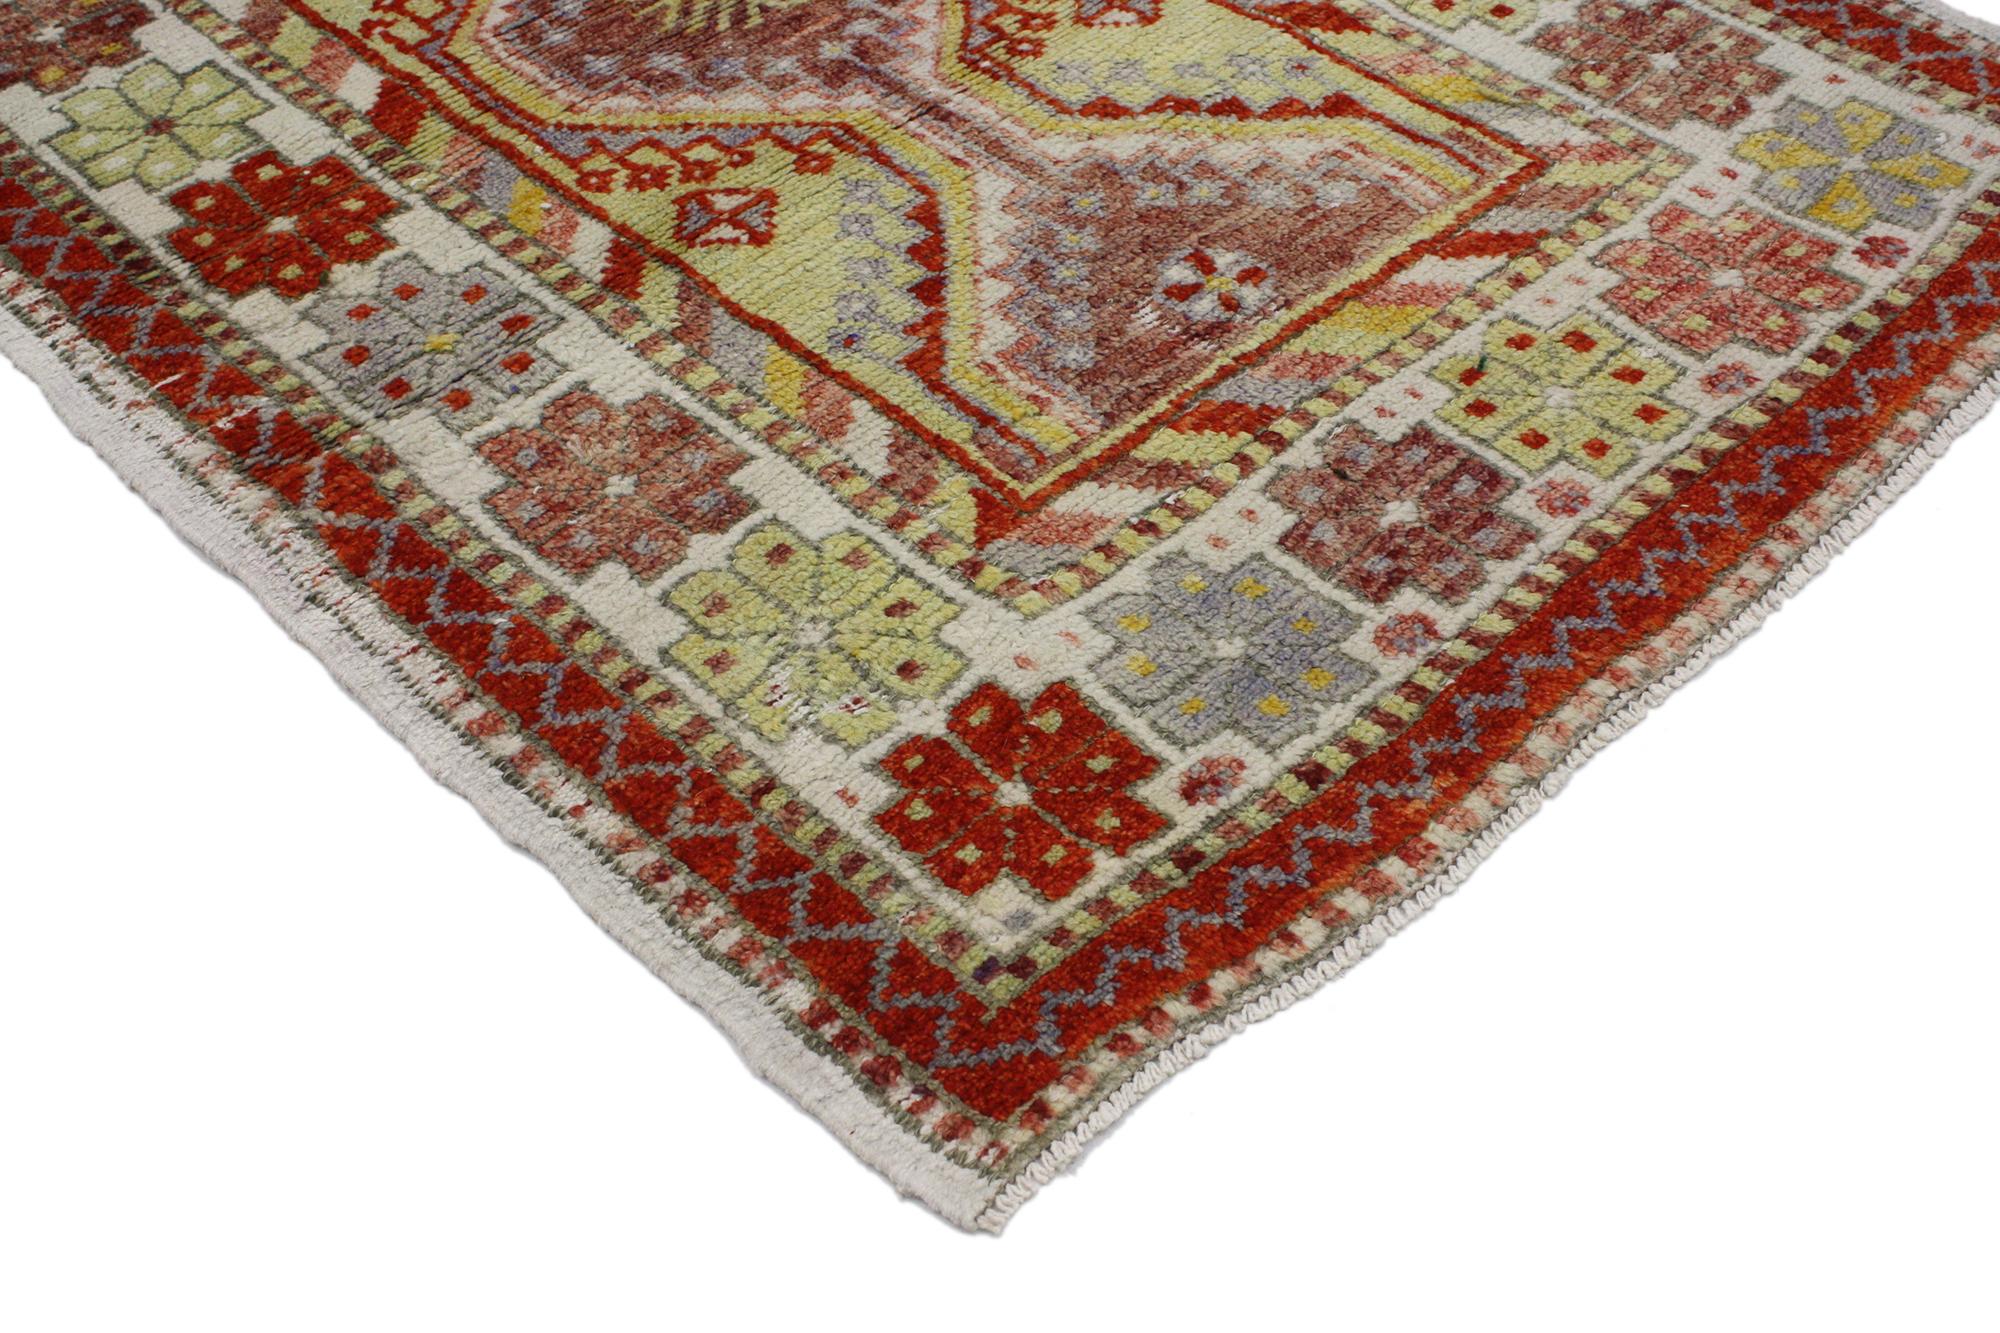 51741 vintage Turkish Oushak rug, Anatolian Yuntdag Rug, Foyer or Entry Rug. This hand-knotted wool vintage Turkish Oushak Yuntdag rug features a modern traditional style. Immersed in Anatolian history and vibrant colors, this vintage Oushak rug